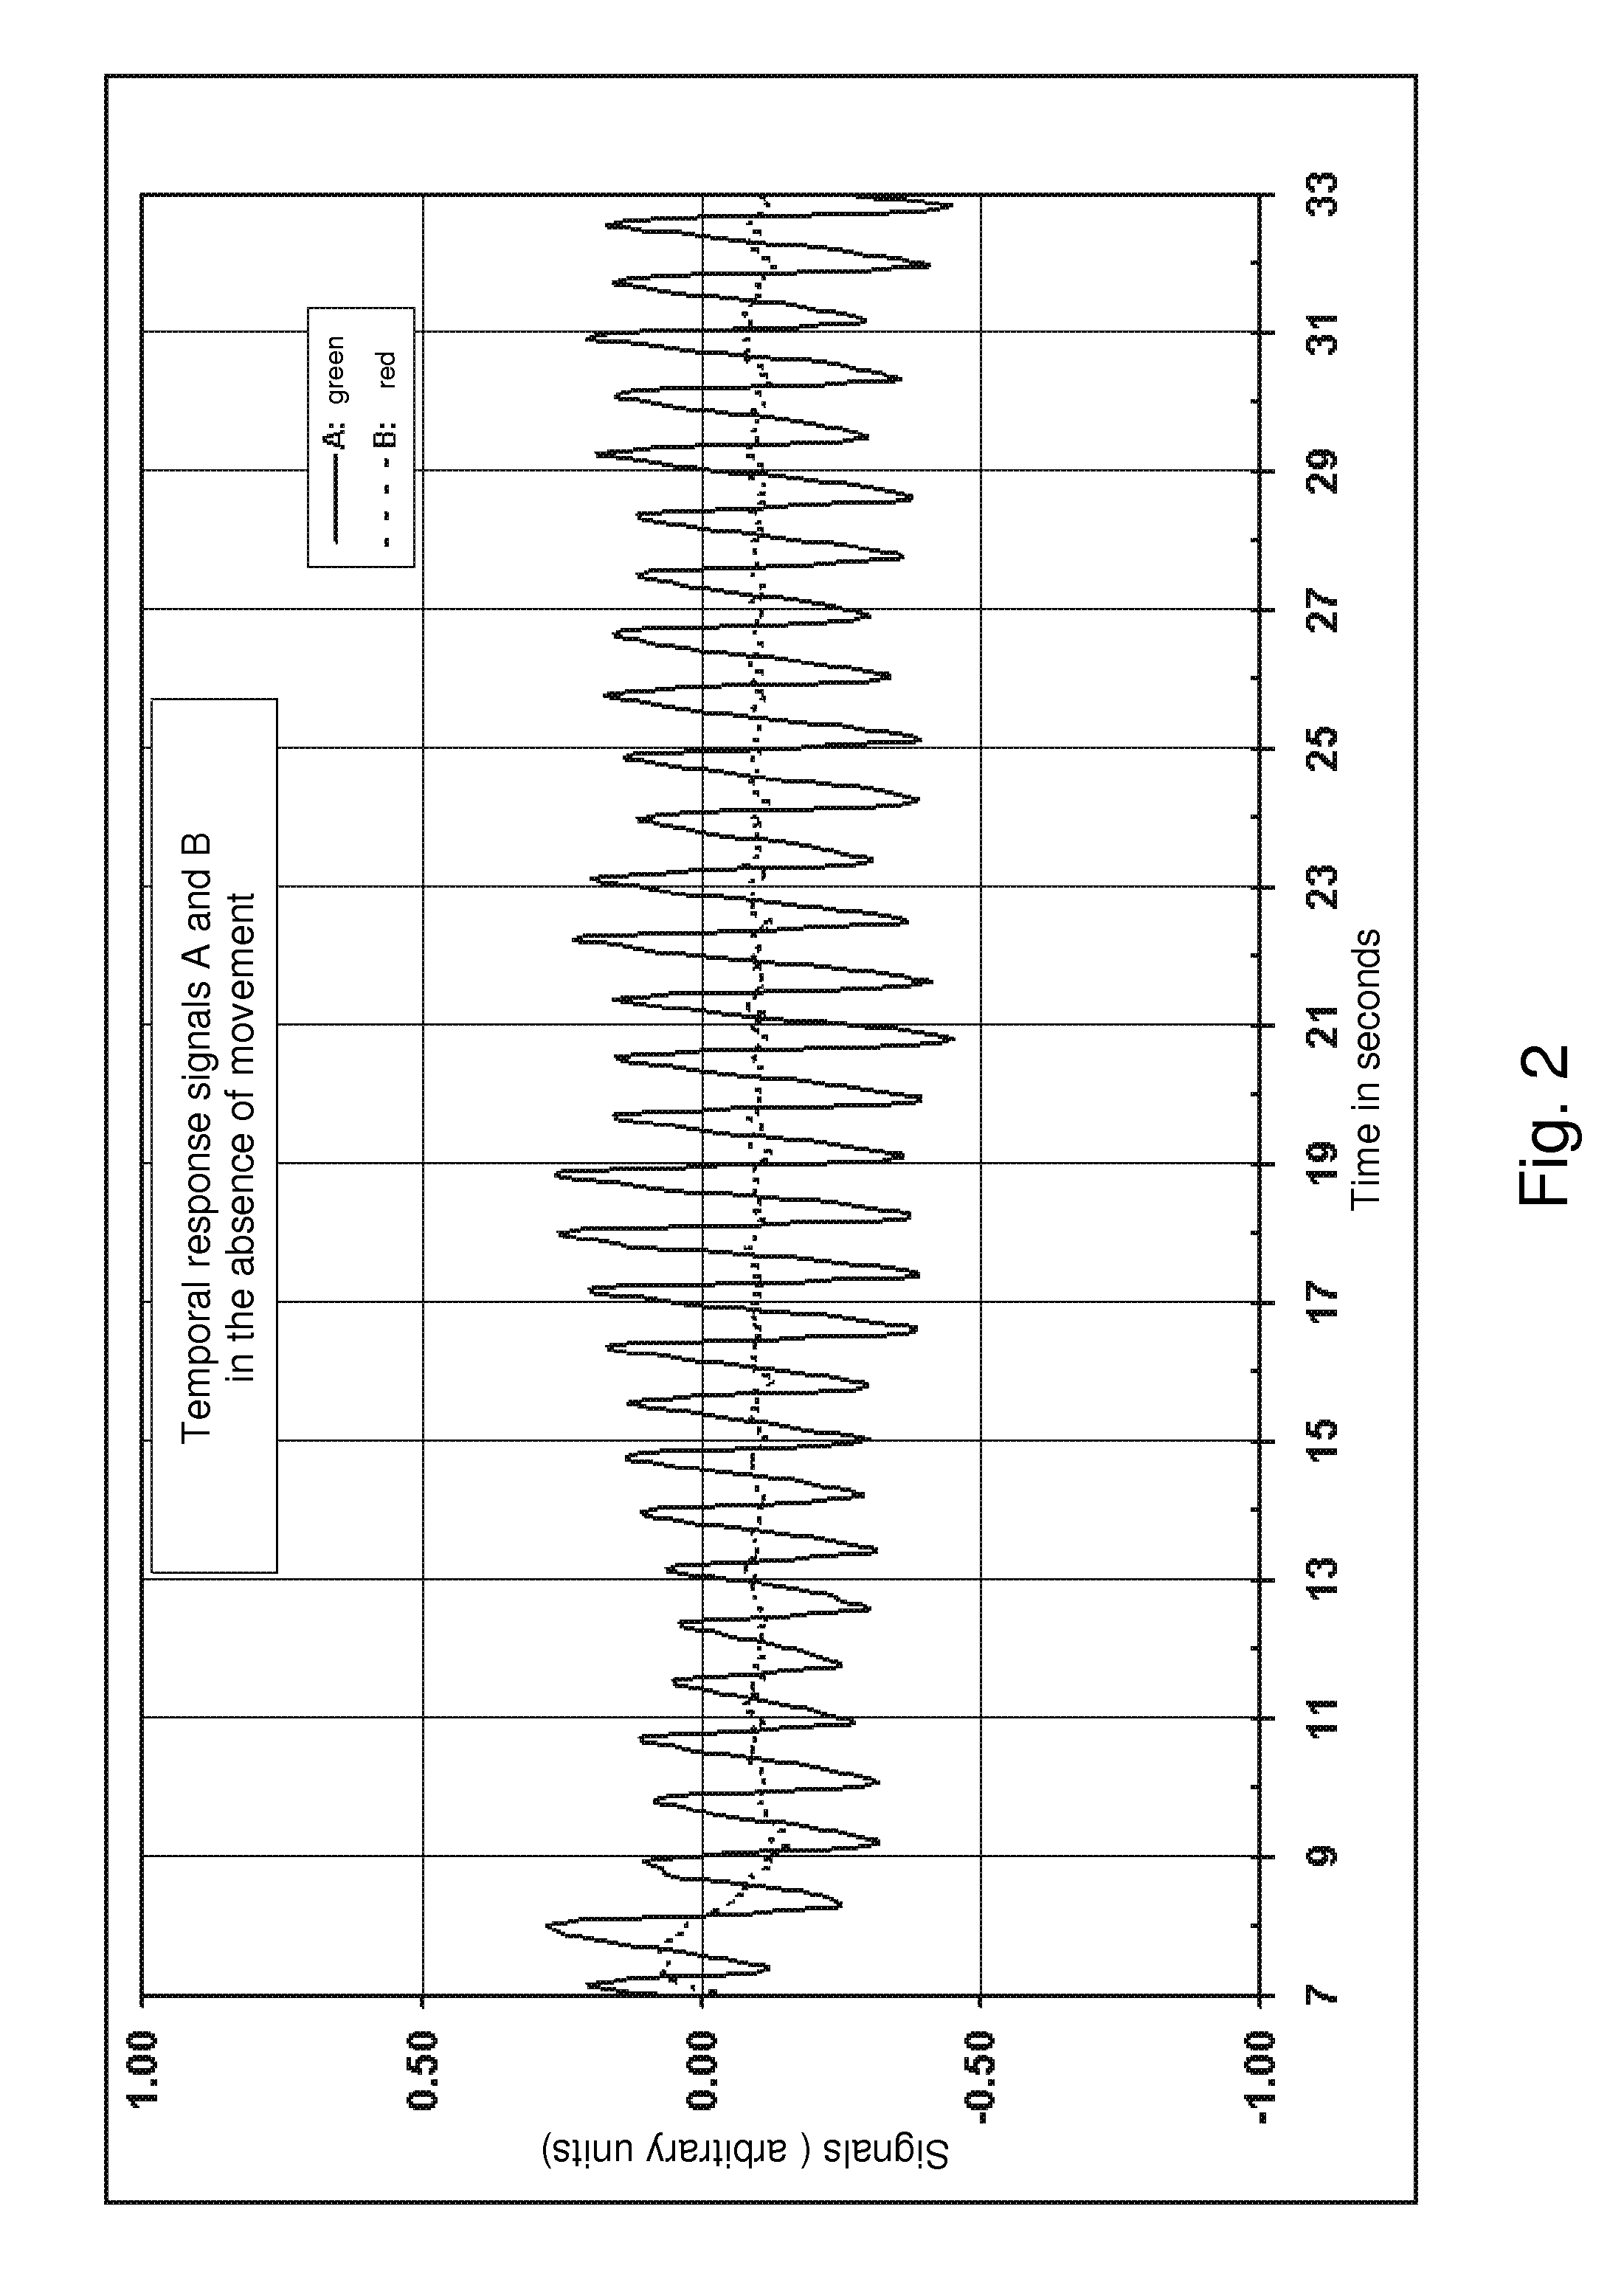 Method and device for measuring the pulse by means of light waves with two wavelengths